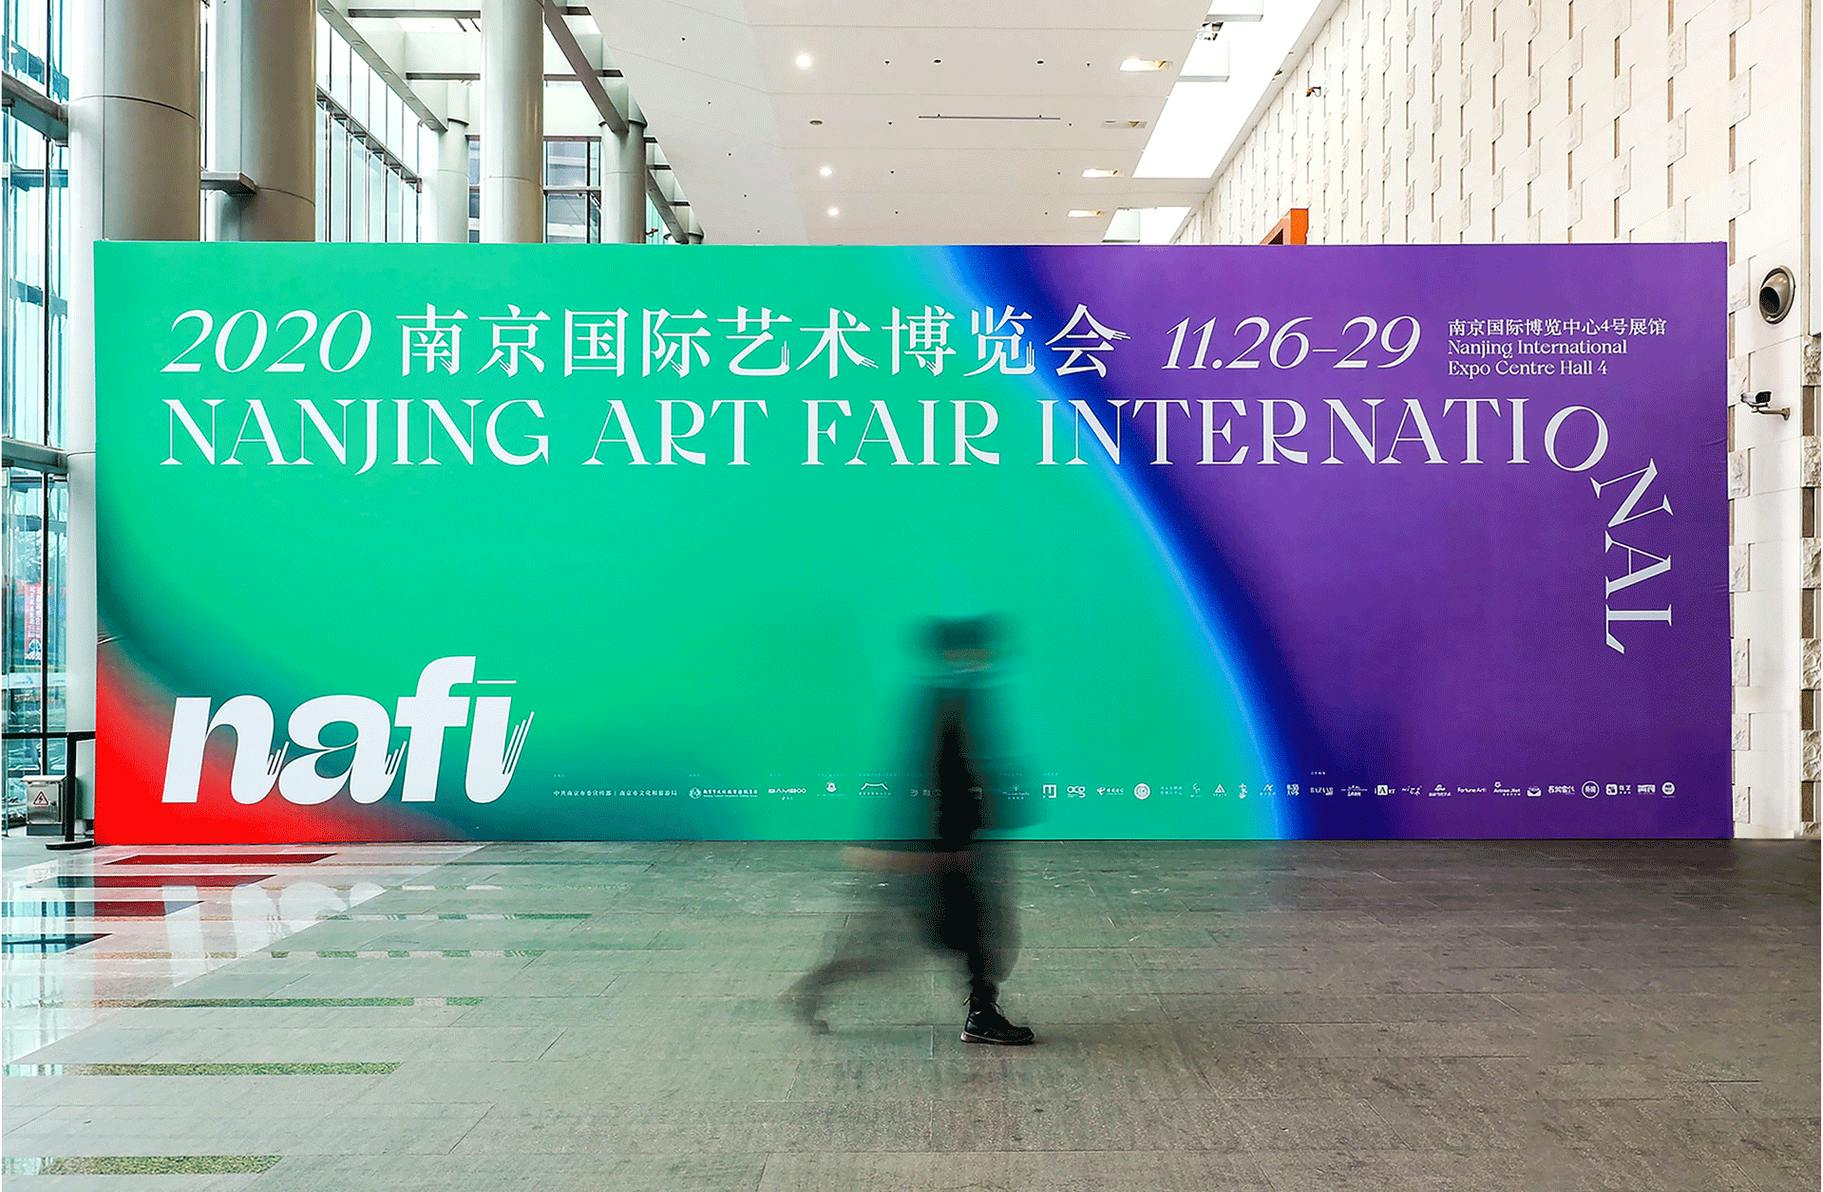 In Use for Nanjing Art Fair International, by Untitled Macao